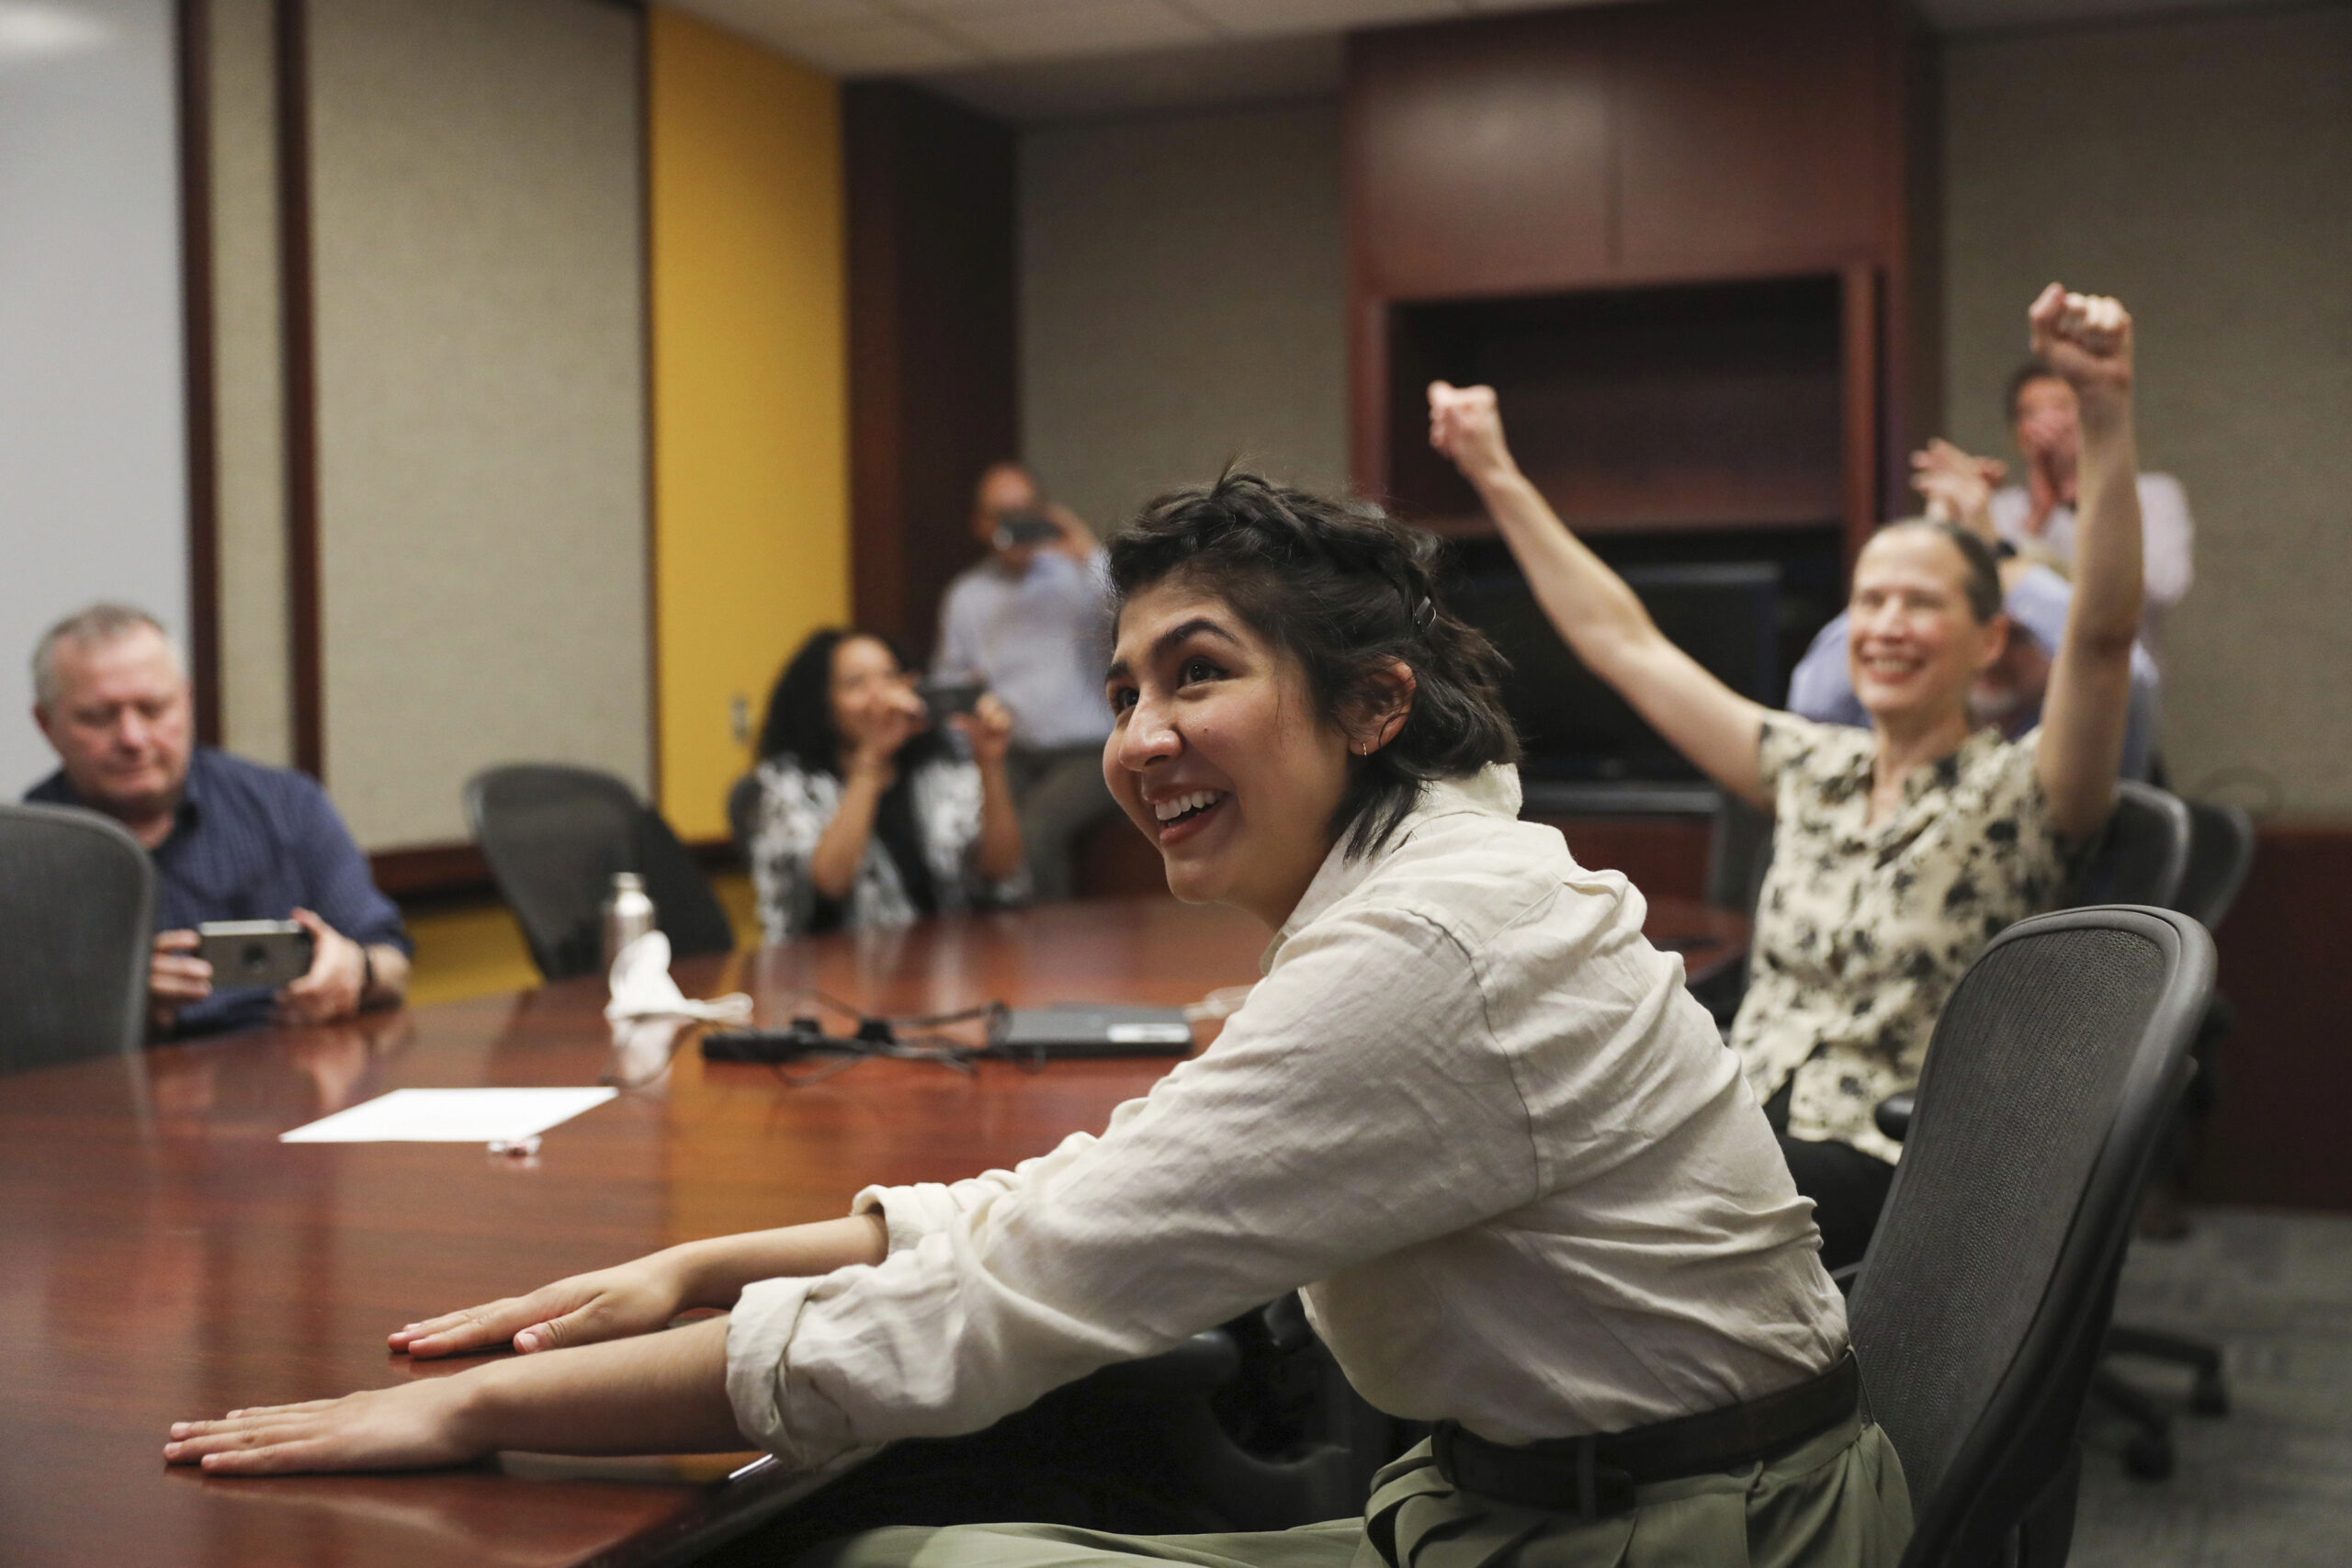 Cecilia Reyes, of the Chicago Tribune, reacts as she and Madison Hopkins of the Better Government Association, not pictured, win the Pulitzer Prize in Local Reporting at the Chicago Tribune's Freedom Center in Chicago, Monday, May 9, 2022. (Jose M. Osorio/Chicago Tribune via AP)